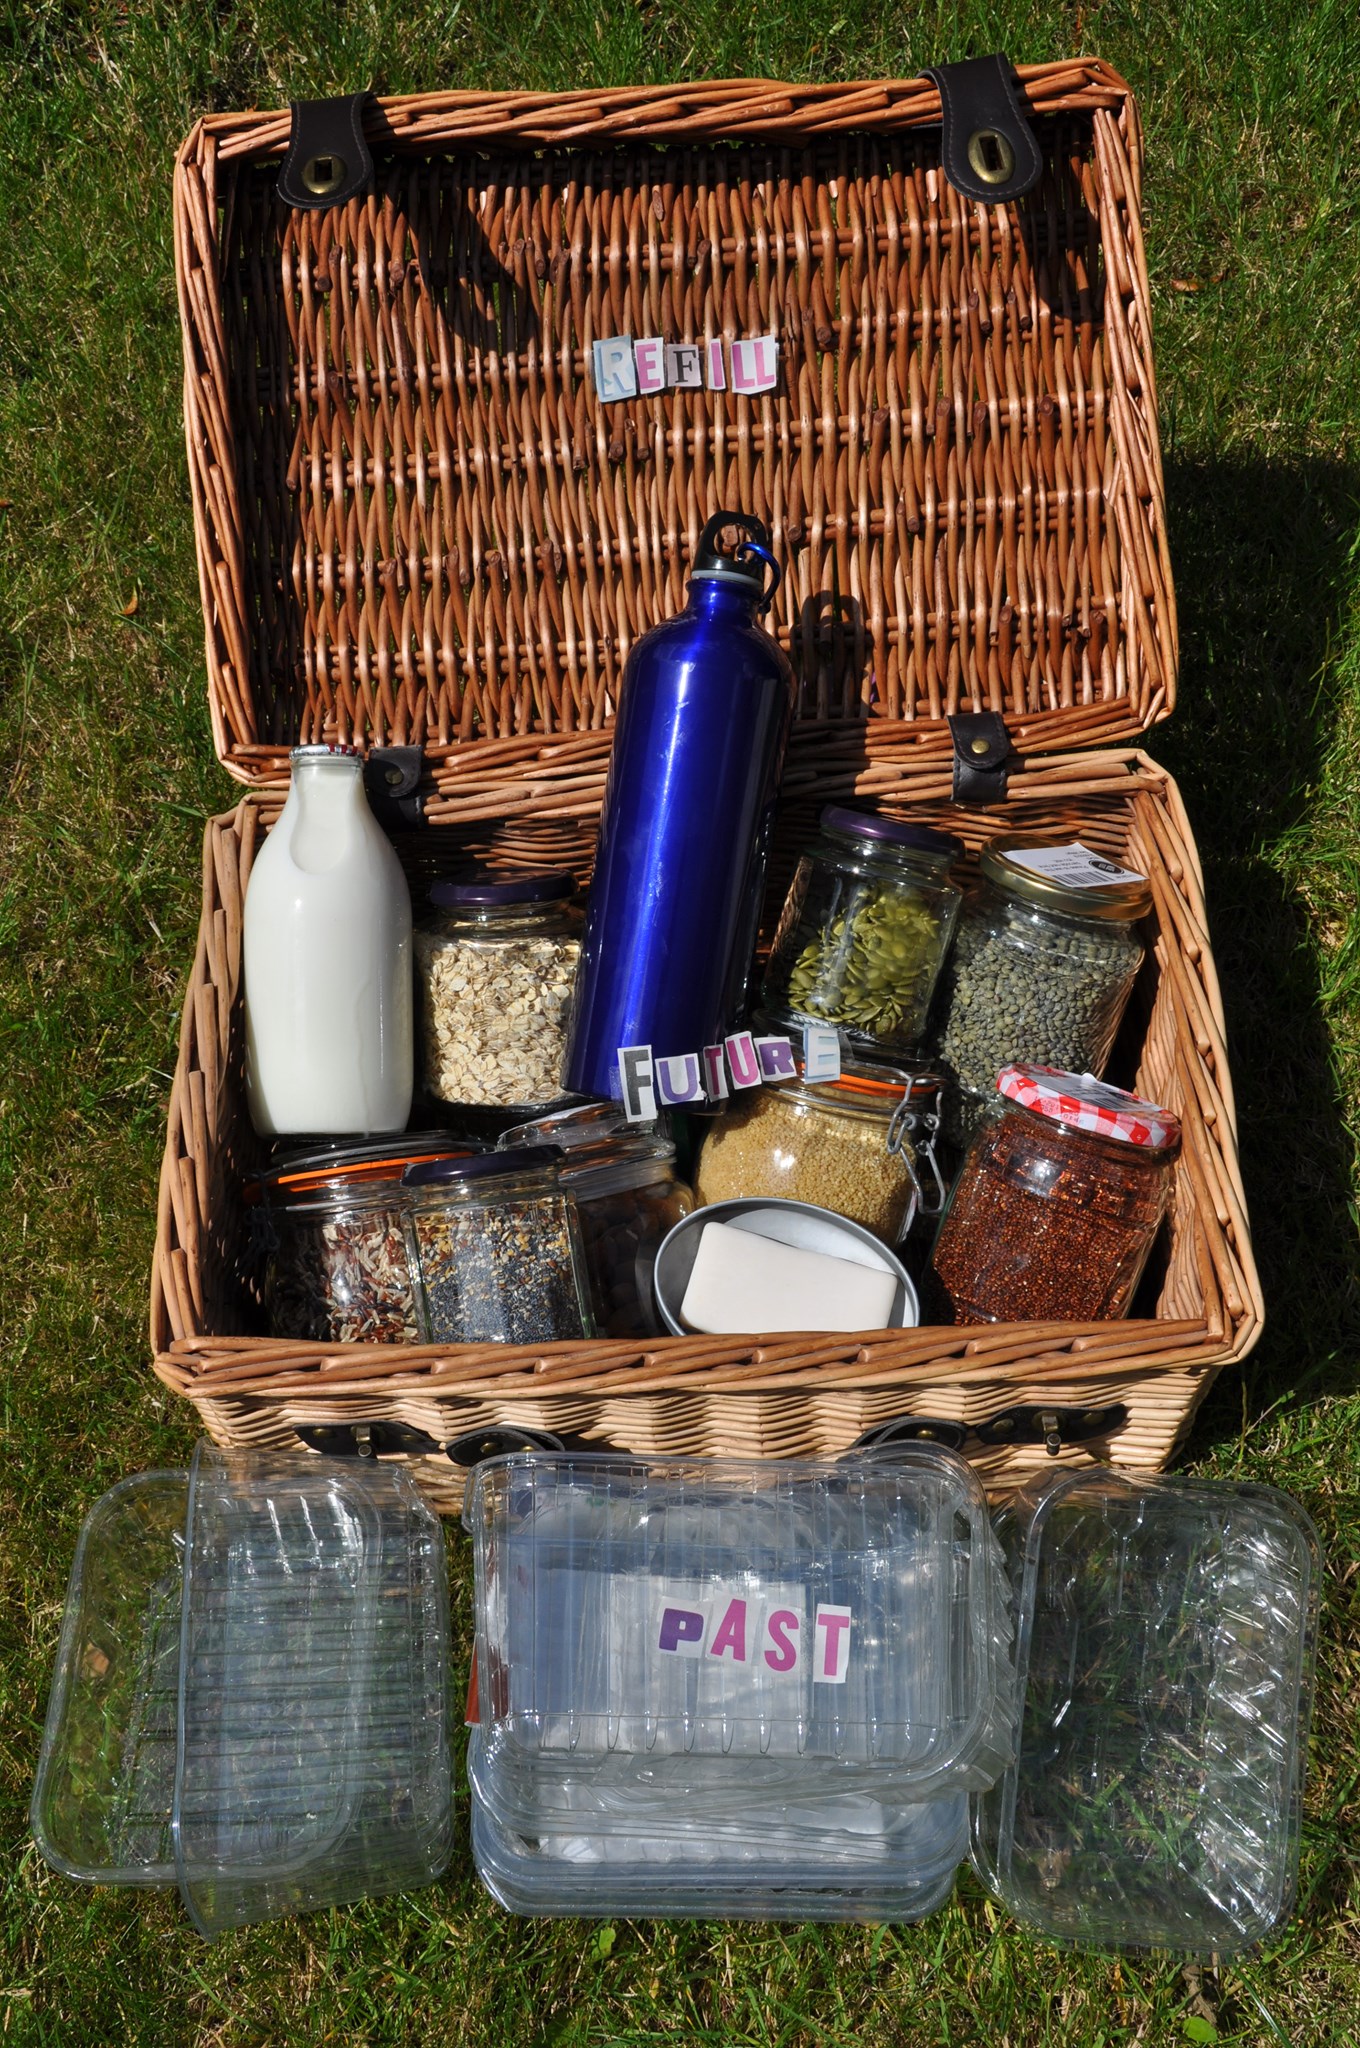 Winning entry: A hamper full of reusable food and drink items